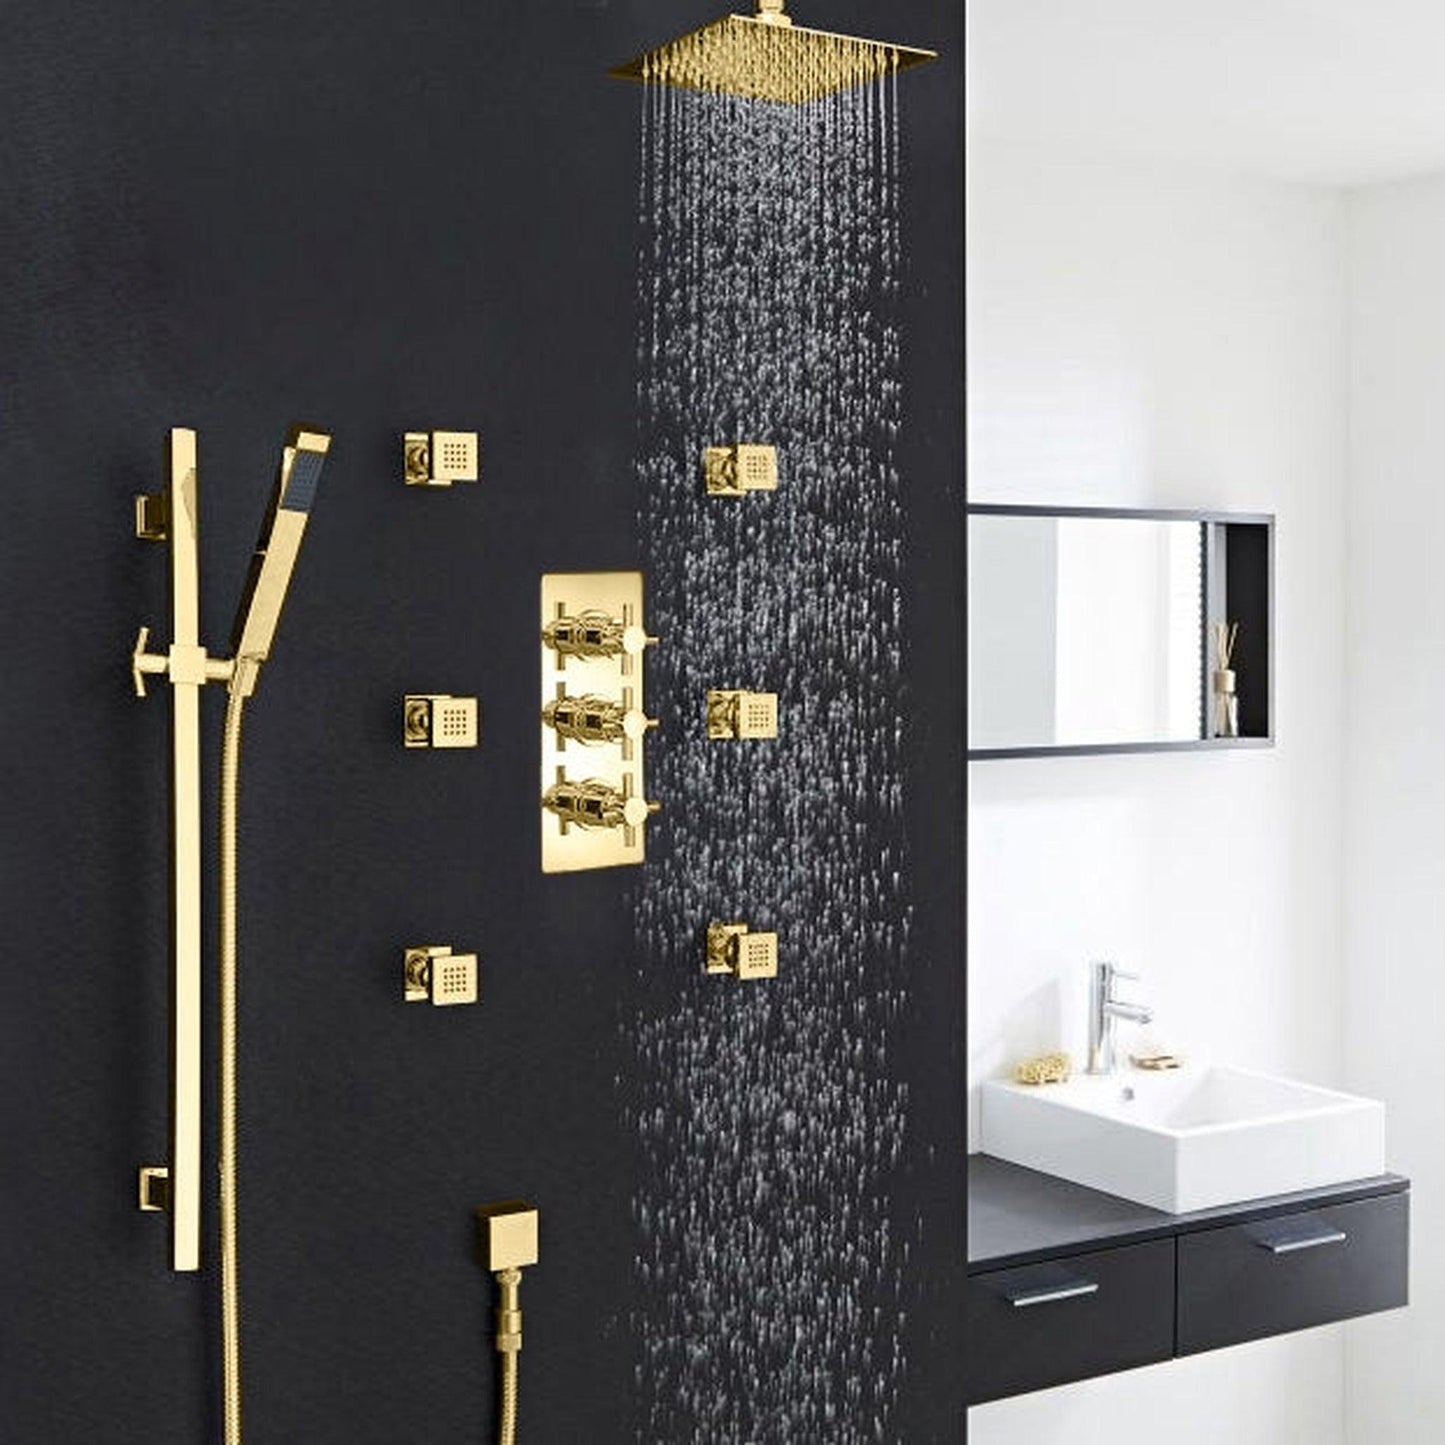 Fontana Reno 12" Gold Round Ceiling Mounted Rainfall Shower System With 6-Body Massage Jets and Hand Shower